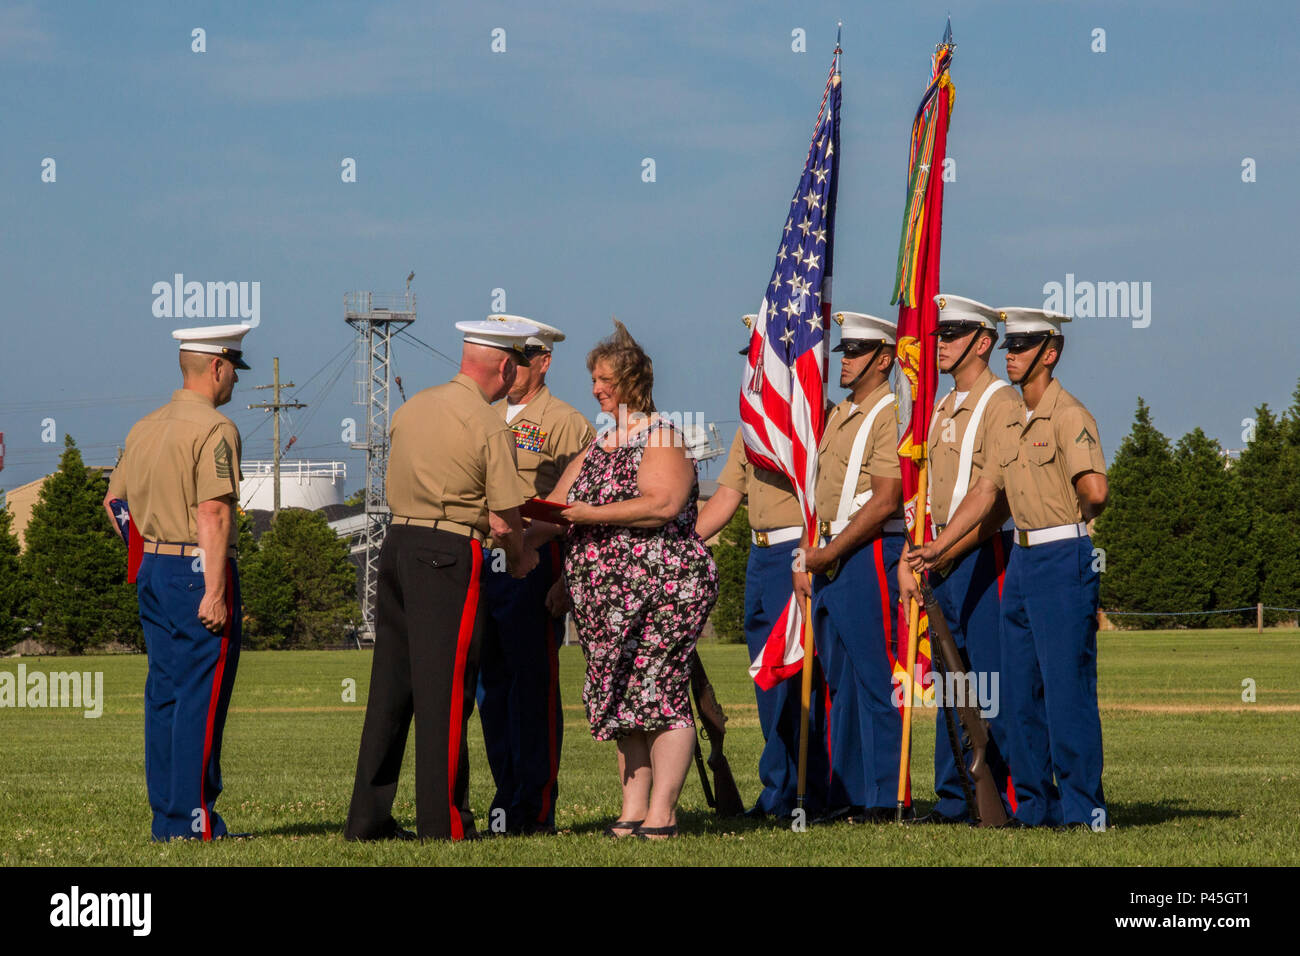 U.S. Marine Corps Maj. Gen. Walter L. Miller Jr. (center), commanding general, II Marine Expeditionary Force, presents Mrs. Mary Berry, wife of Sgt. Maj. Paul A. Berry, with an award during her husband’s retirement ceremony, on William Pendleton Thomas Hill Field, June 9, 2016. Berry retired after 30 years of honorable and faithful service. (U.S. Marine Corps photo by Lance Cpl. Judith L. Harter, MCIEAST Combat Camera/Released) Stock Photo